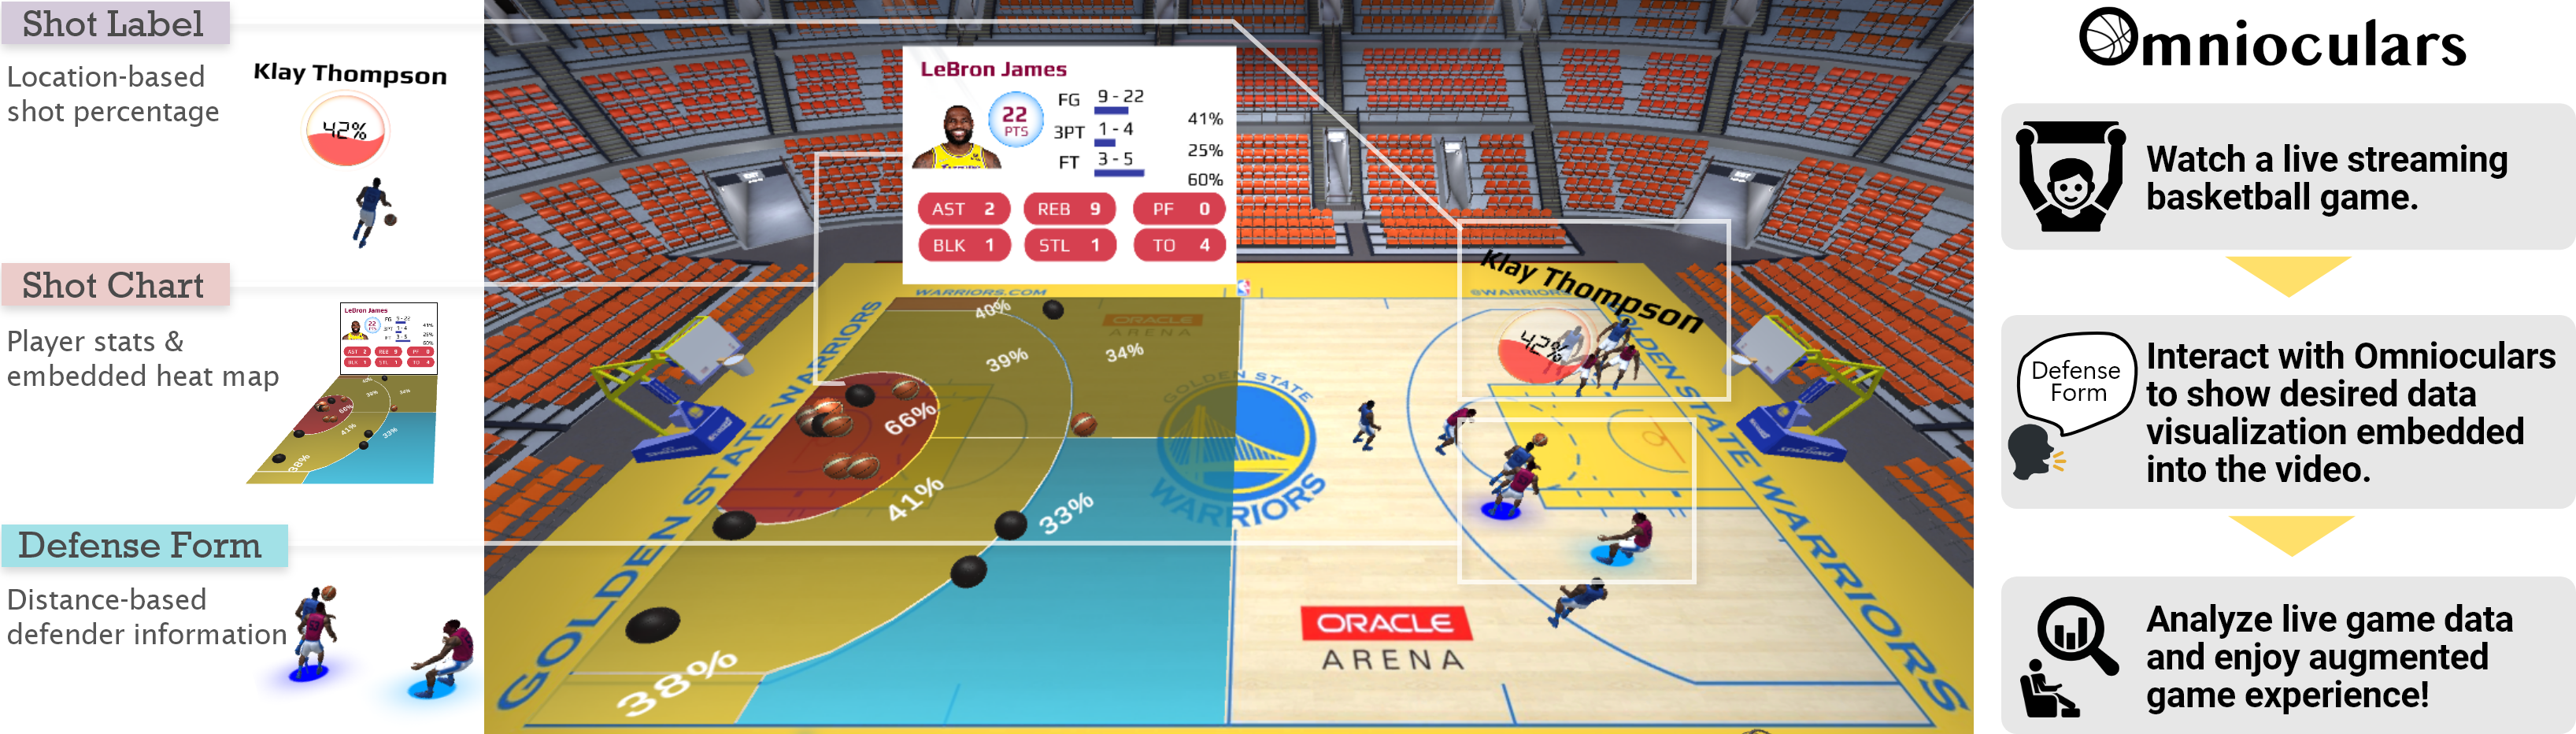 The Quest for Omnioculars: Embedded Visualization for Augmenting Basketball Game Viewing Experiences